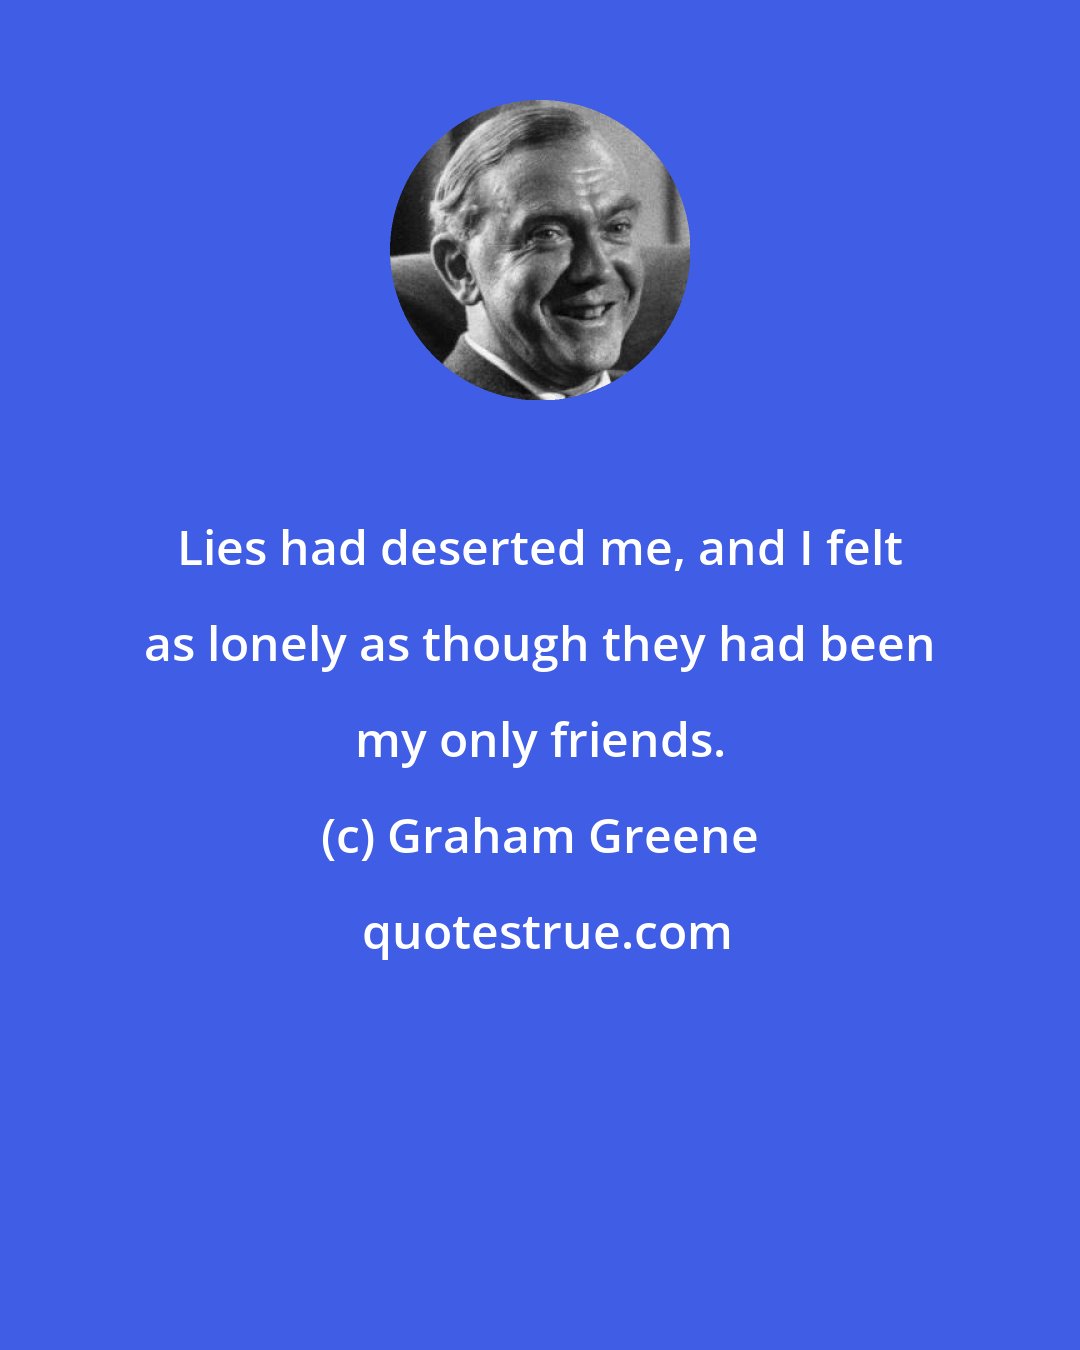 Graham Greene: Lies had deserted me, and I felt as lonely as though they had been my only friends.